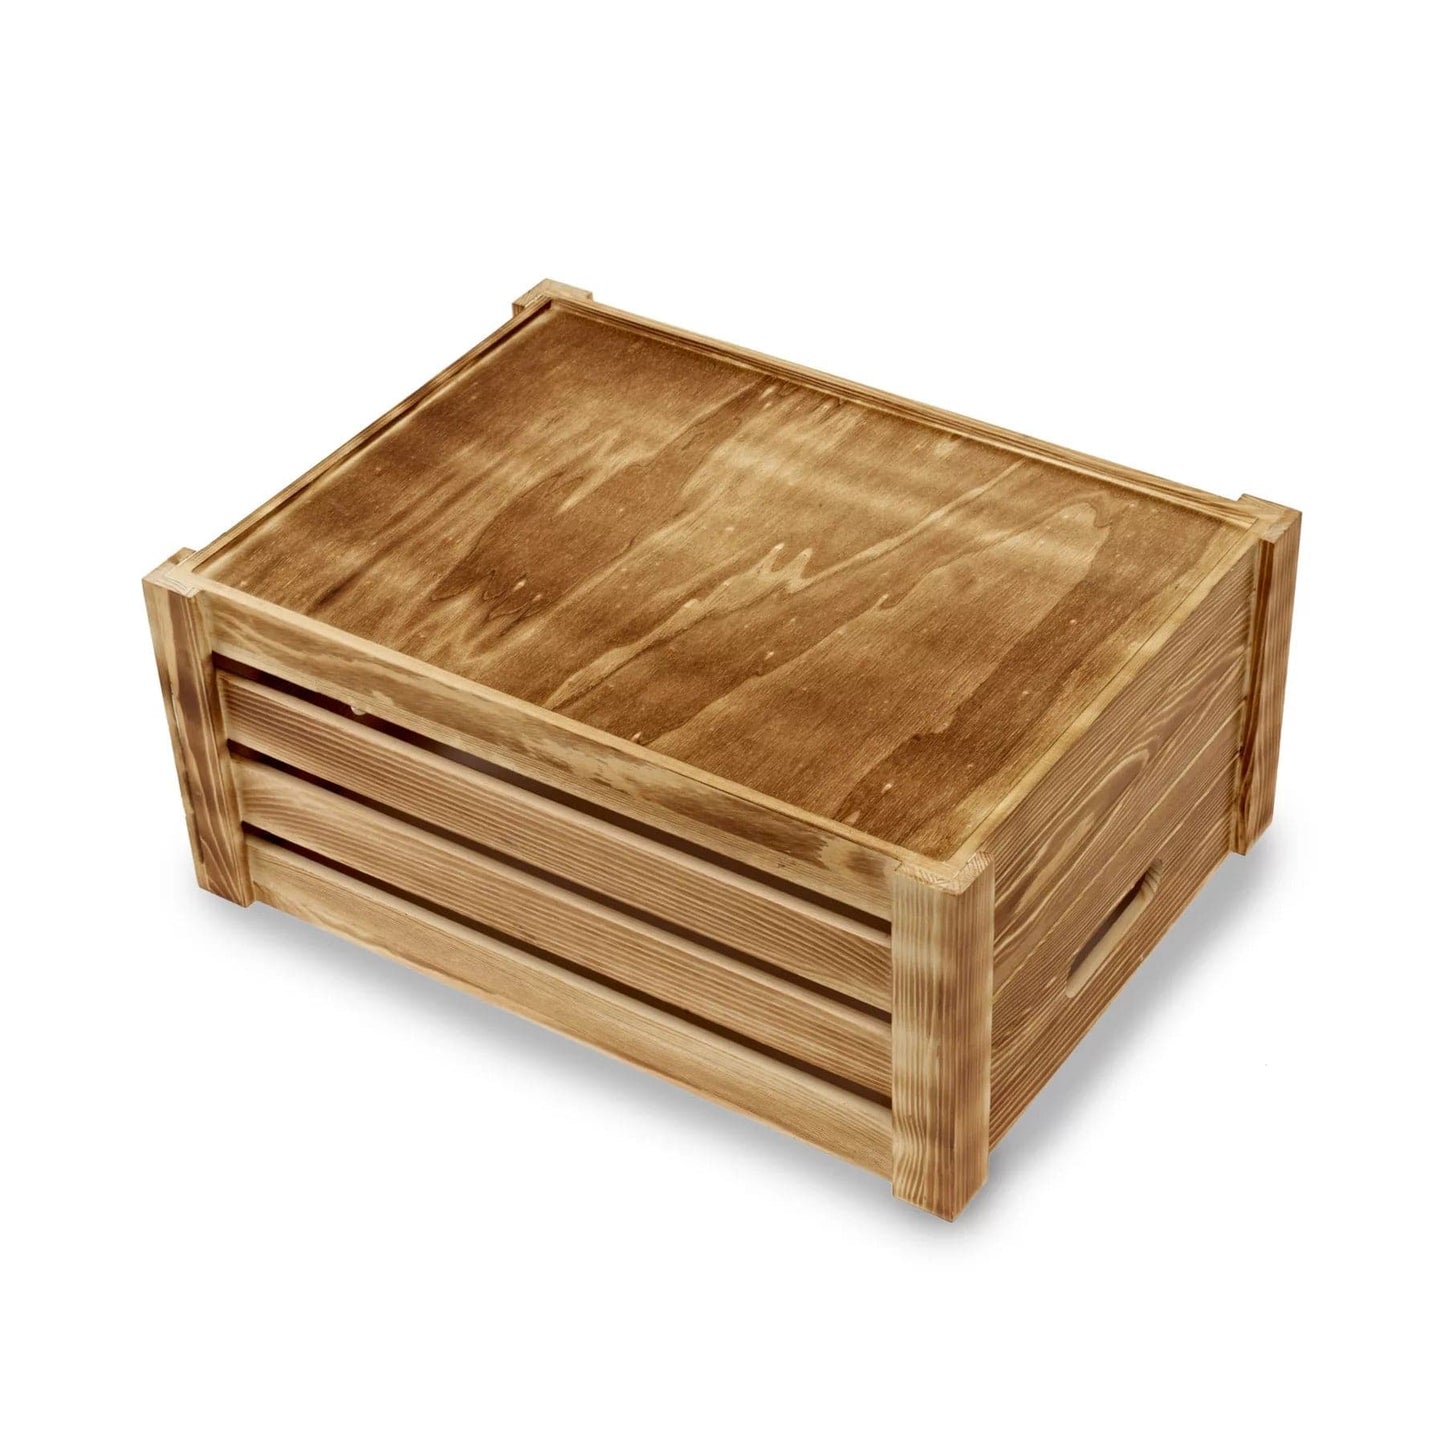 Large Rustic Wooden Crate - bhma